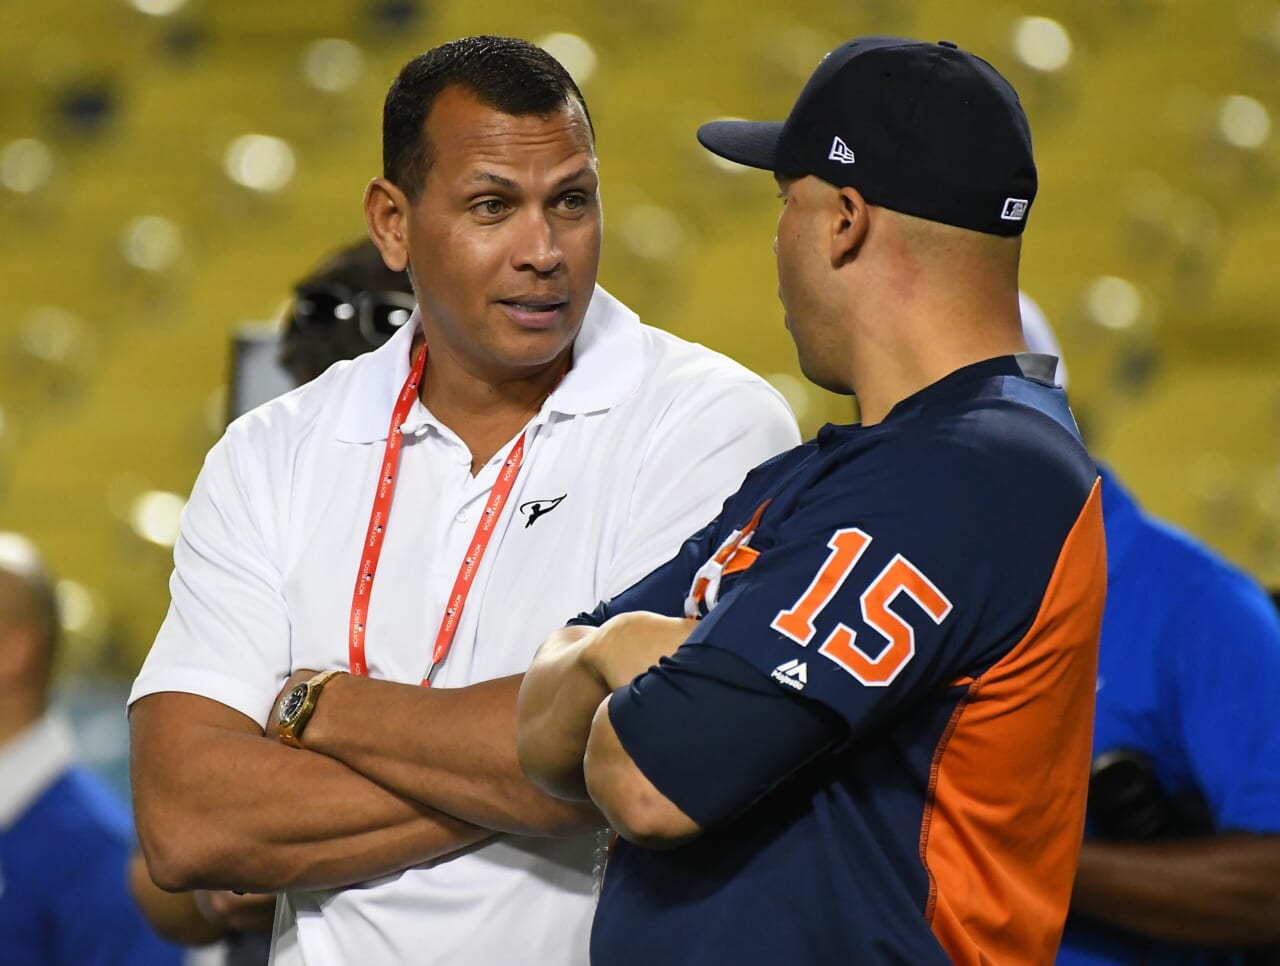 New York Mets: What if A-Rod signed with the New York Mets in 2000?